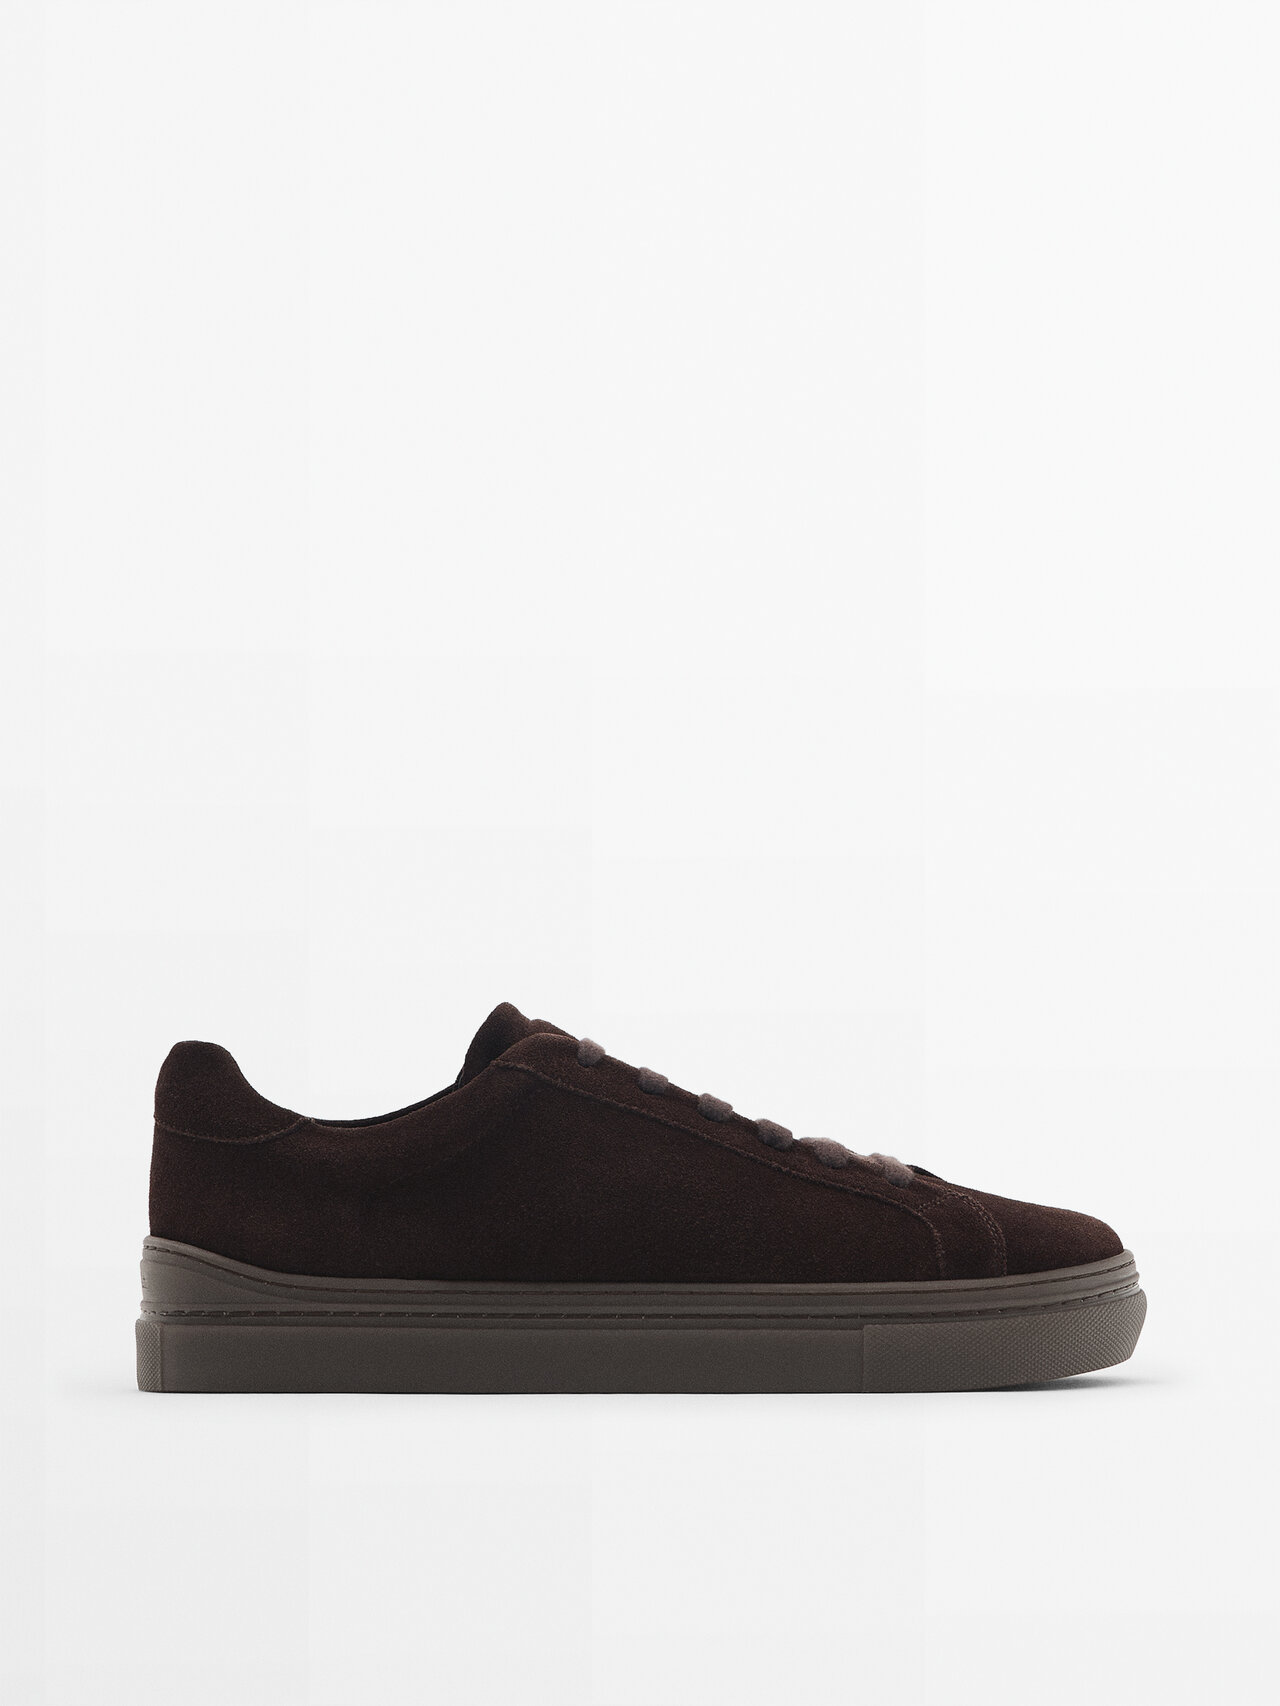 Massimo Dutti Split Suede Leather Trainers In Brown